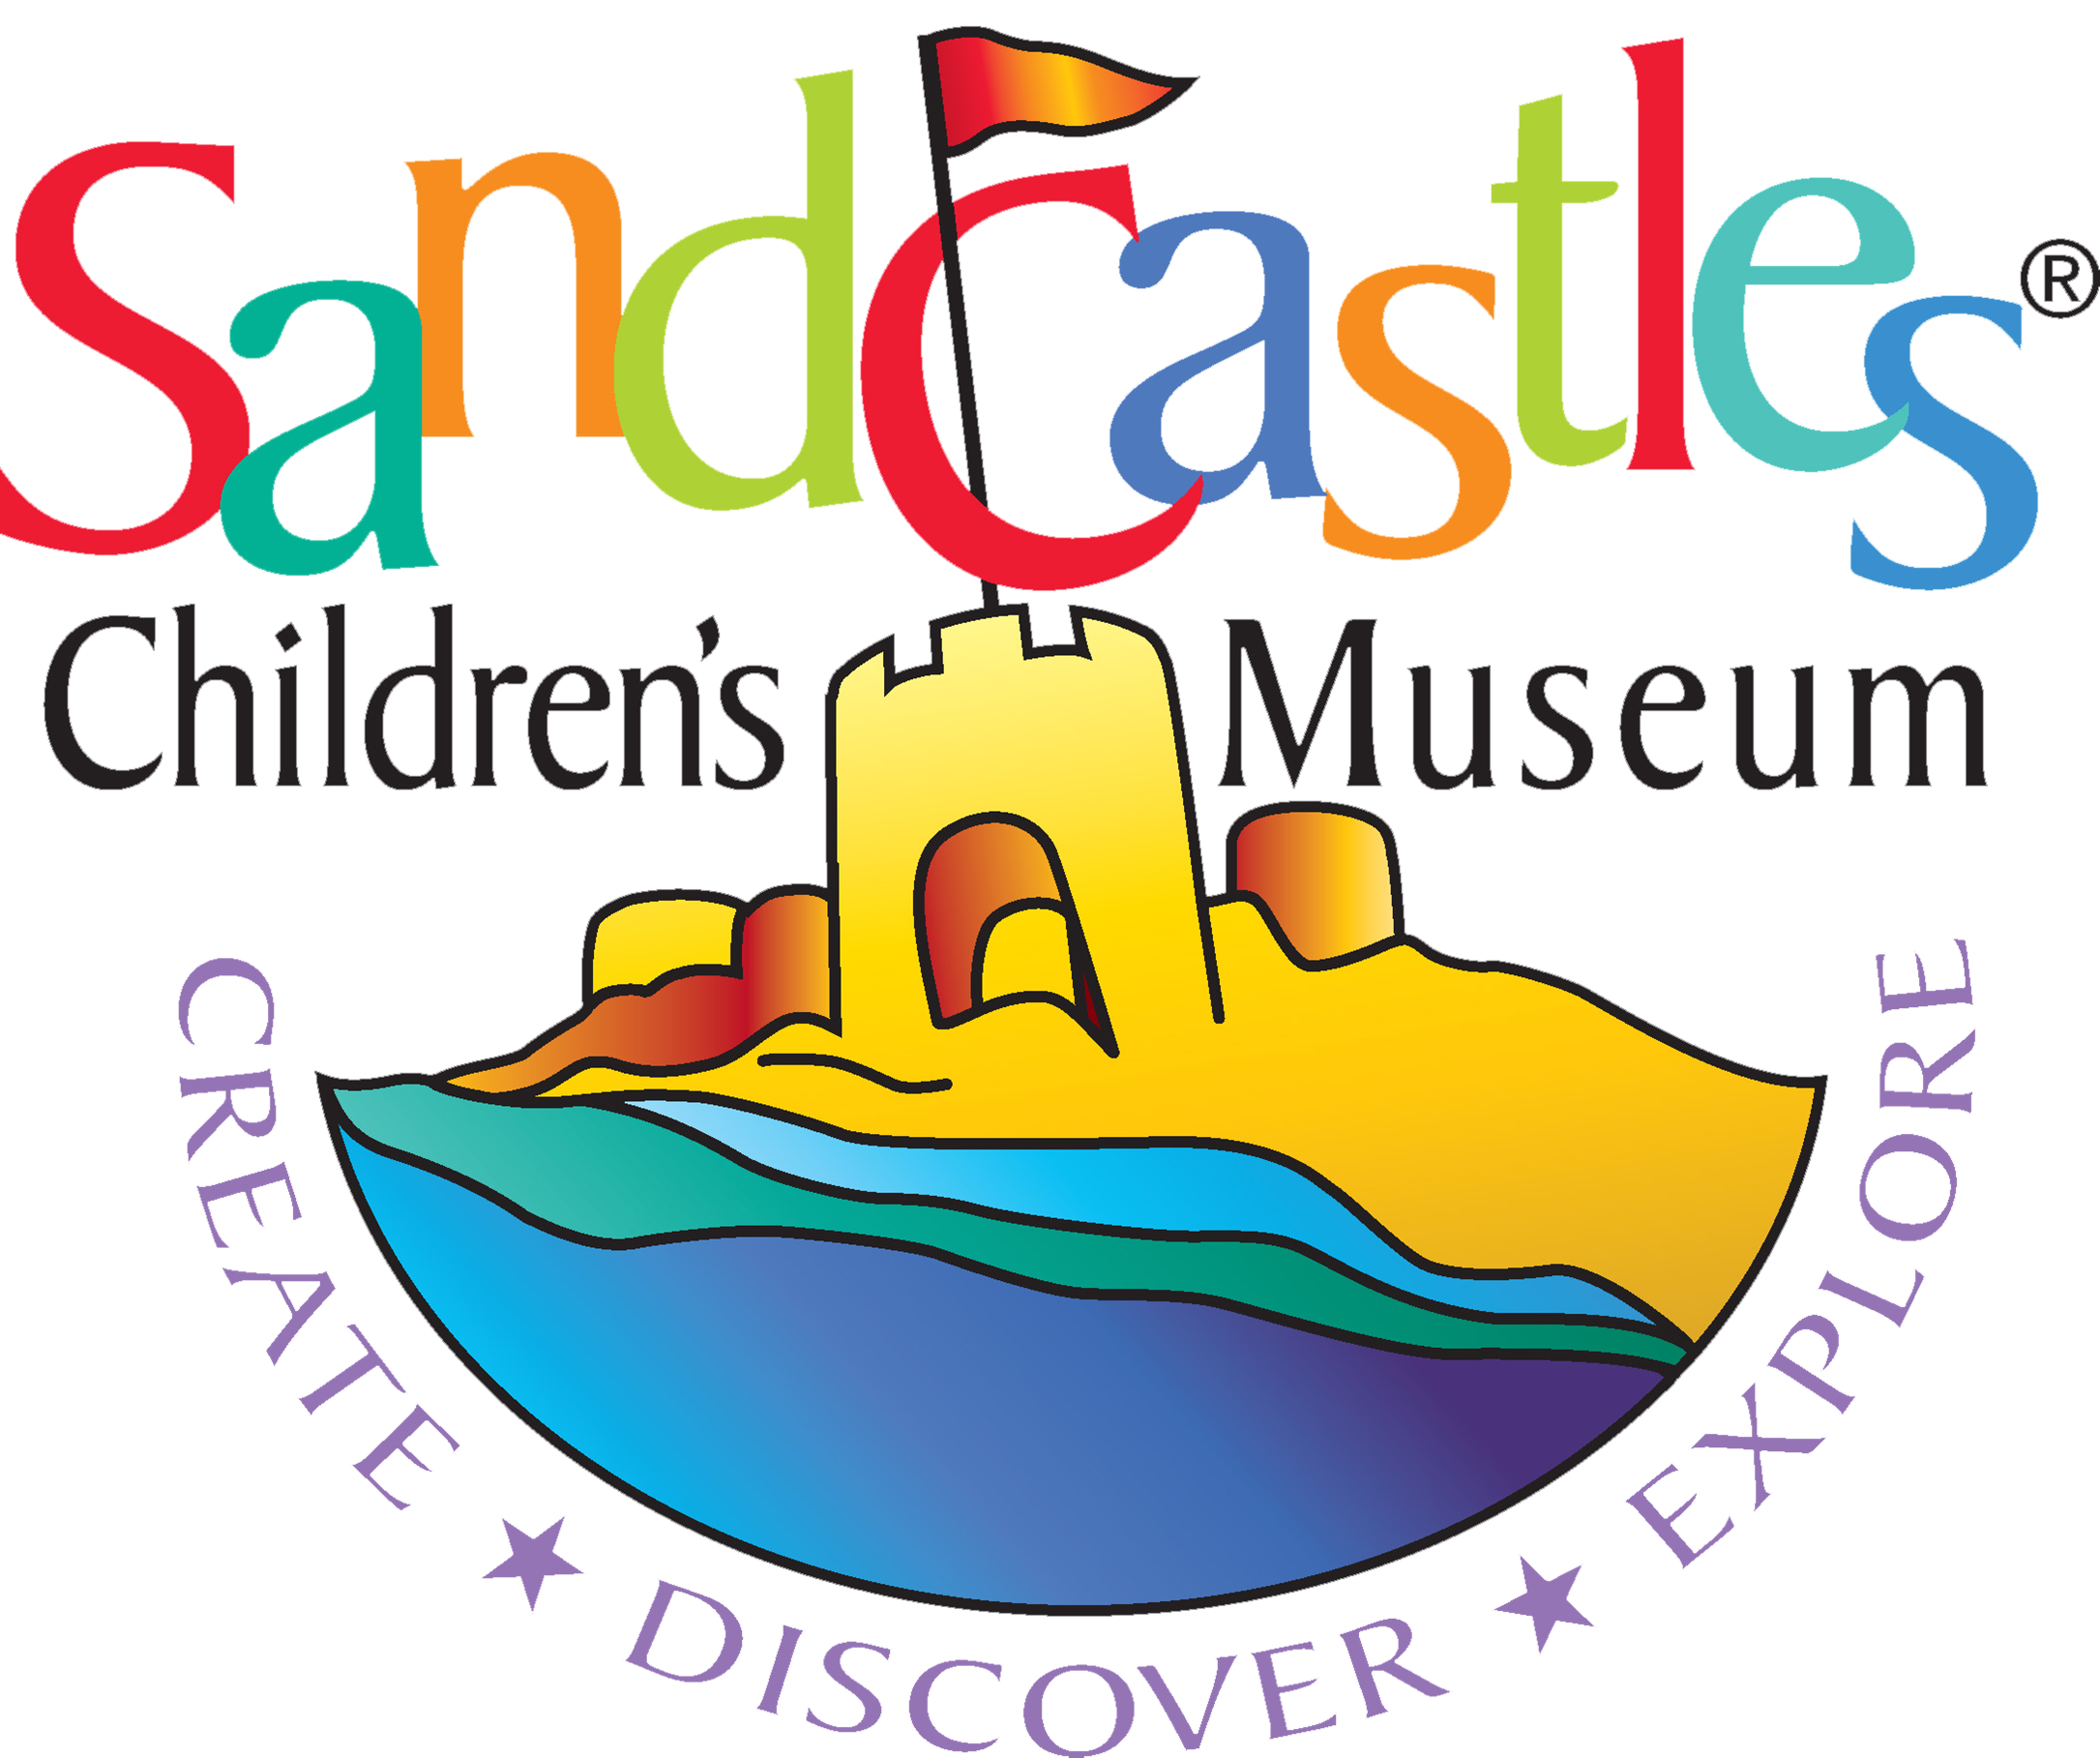 Sandcastles Children’s Museum is a non-profit, hands-on, educational children’s museum. Sandcastles’ mission is to encourage and inspire children and families.